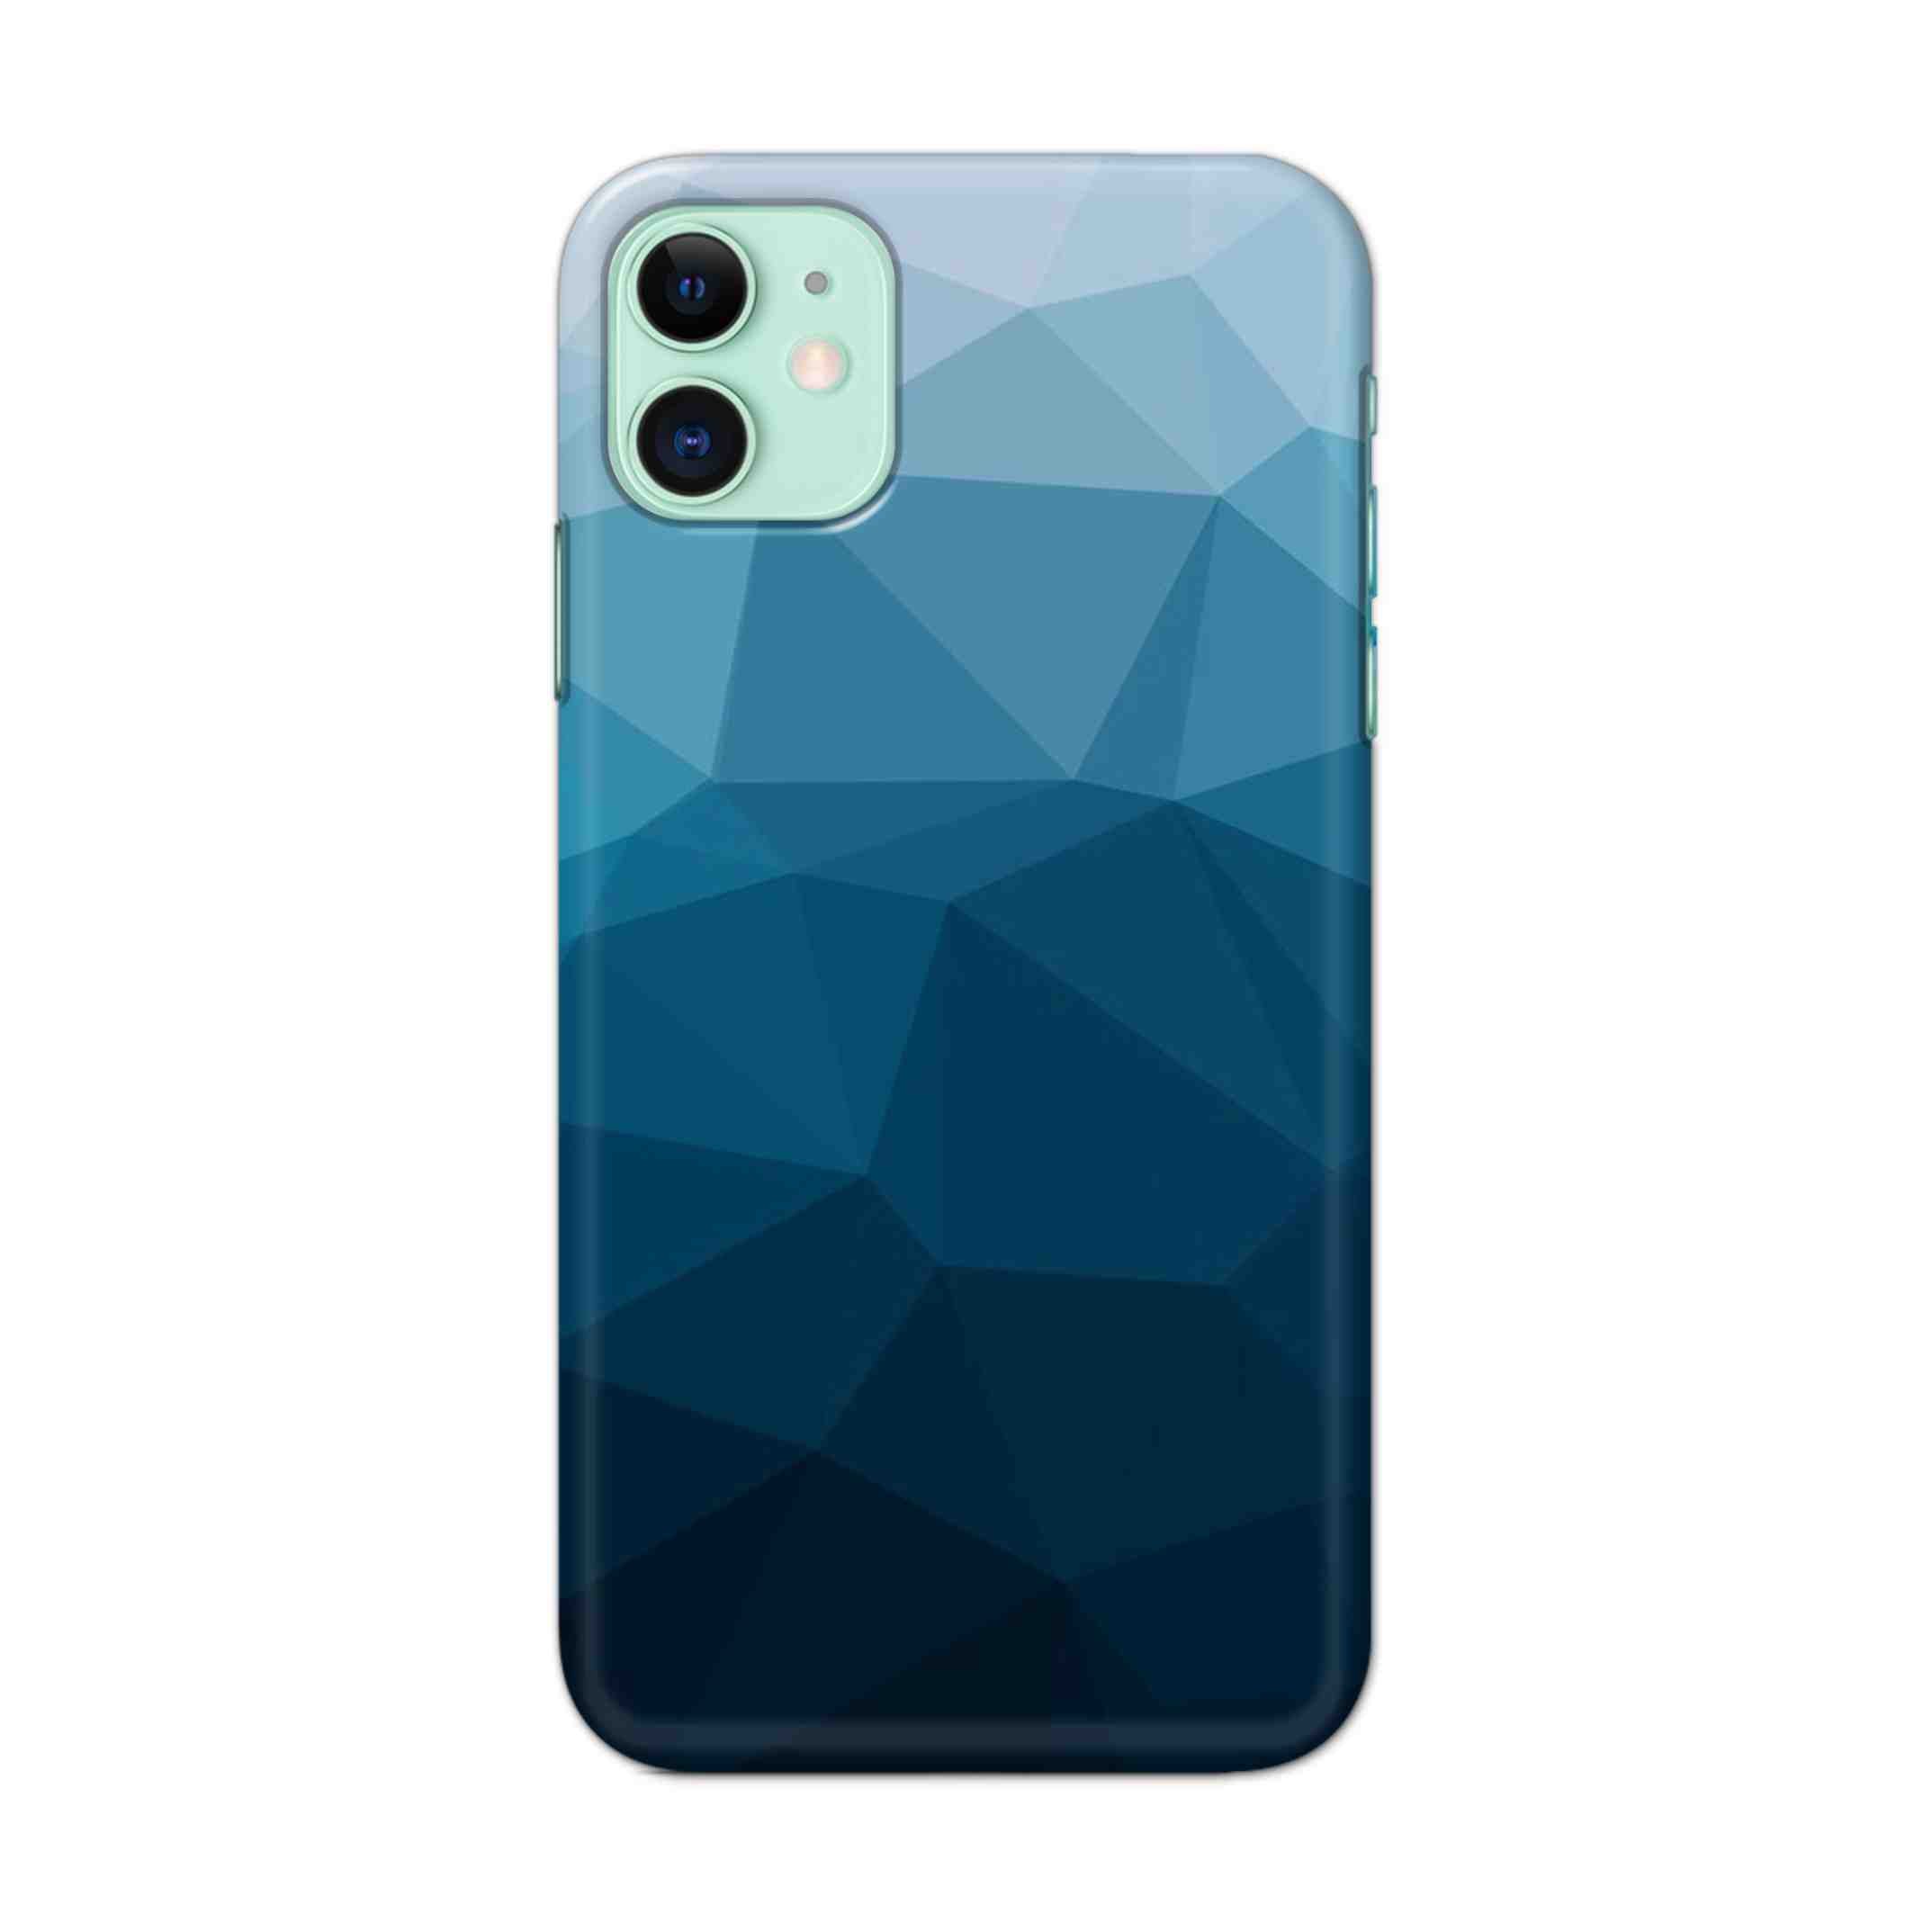 Buy Blue Texture Hard Back Mobile Phone Case Cover For iPhone 11 Online